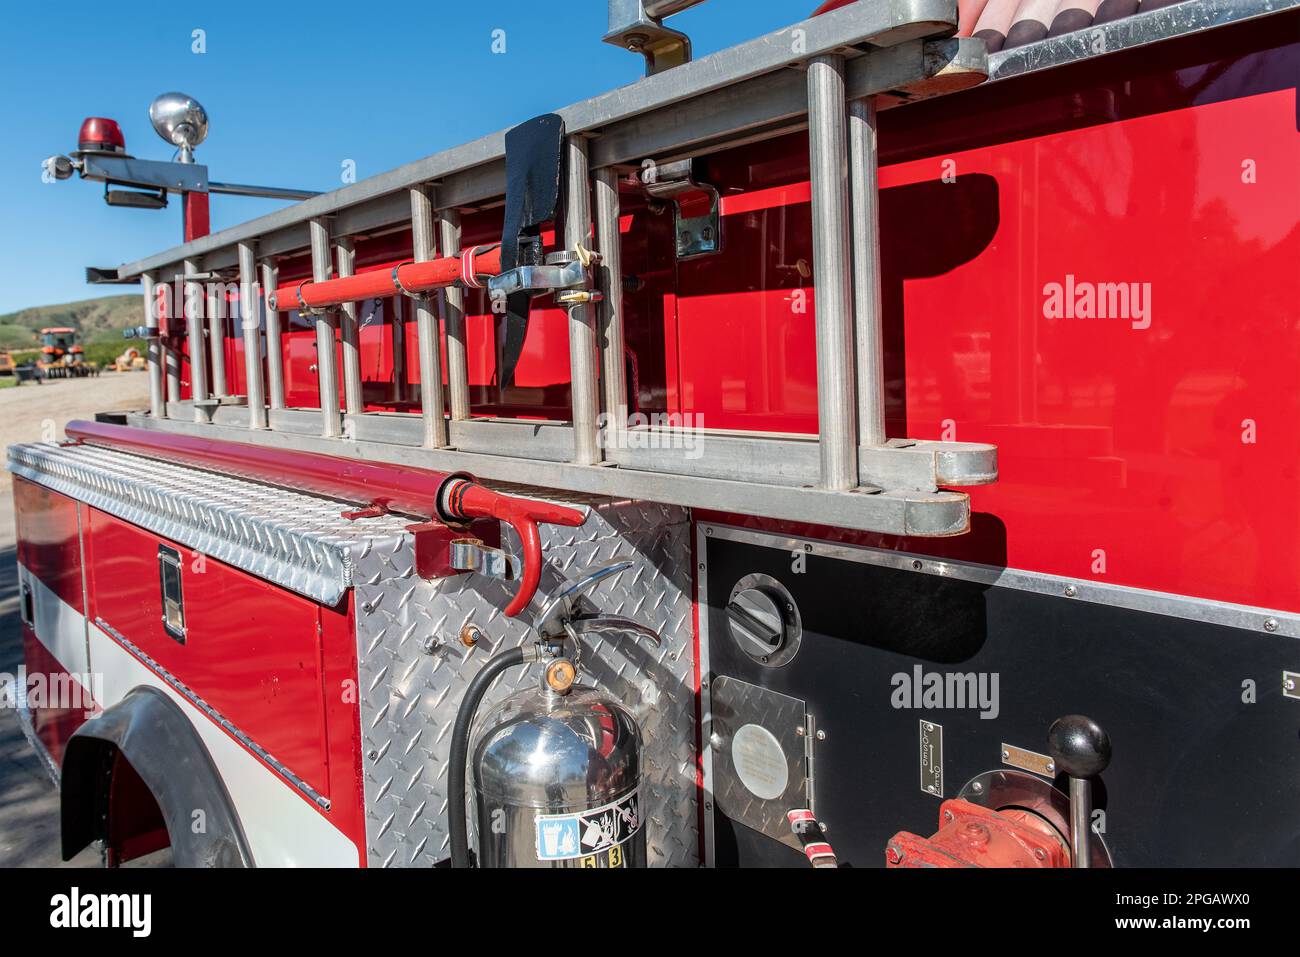 Beaching fire pick ax and sturdy extension ladder is firmly secured to the side of the red fire truck. Stock Photo